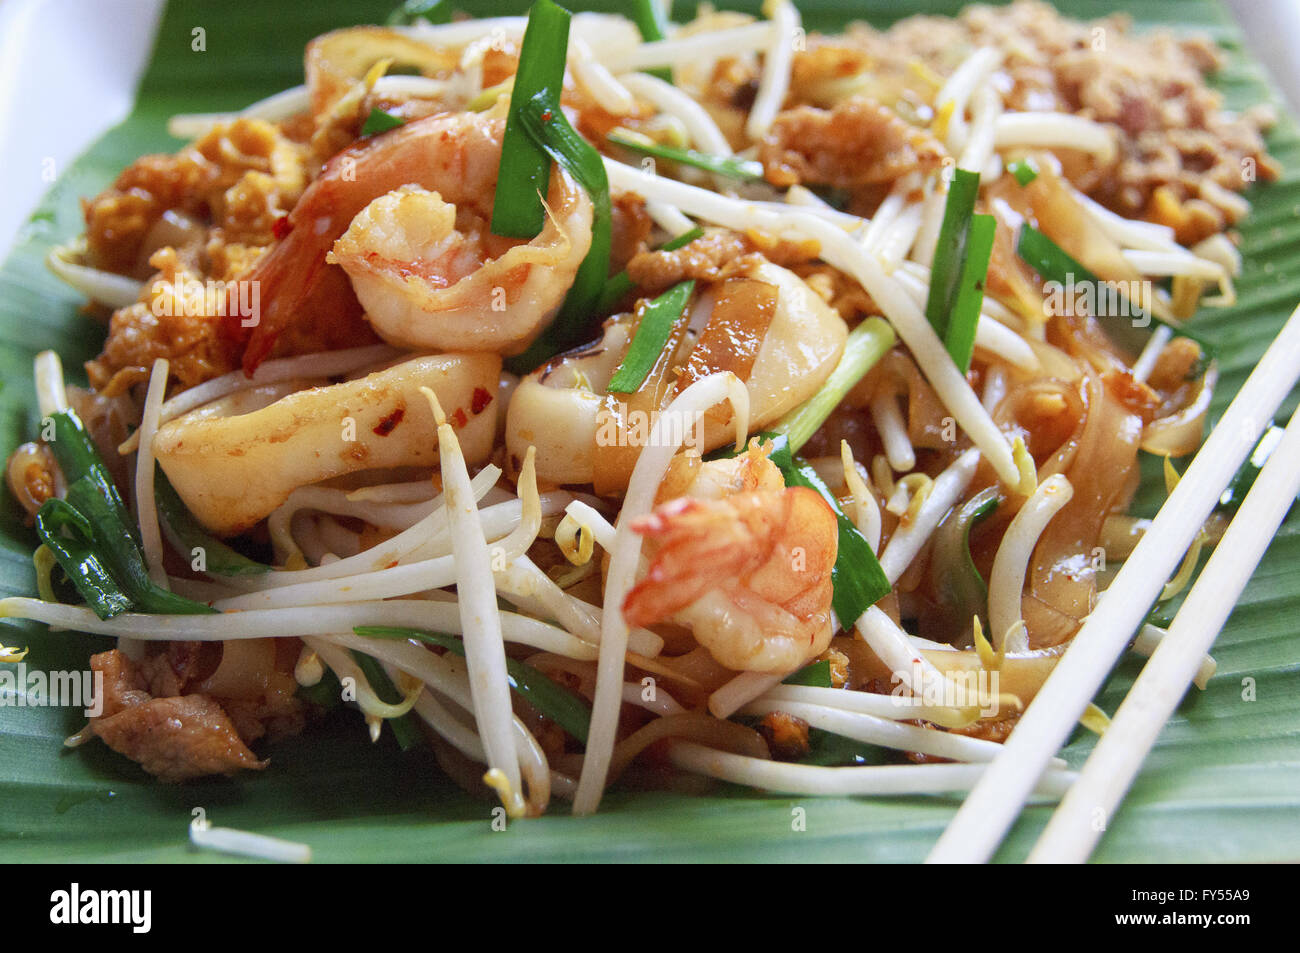 Thai style noodles or Padthai on the banana leaf Stock Photo